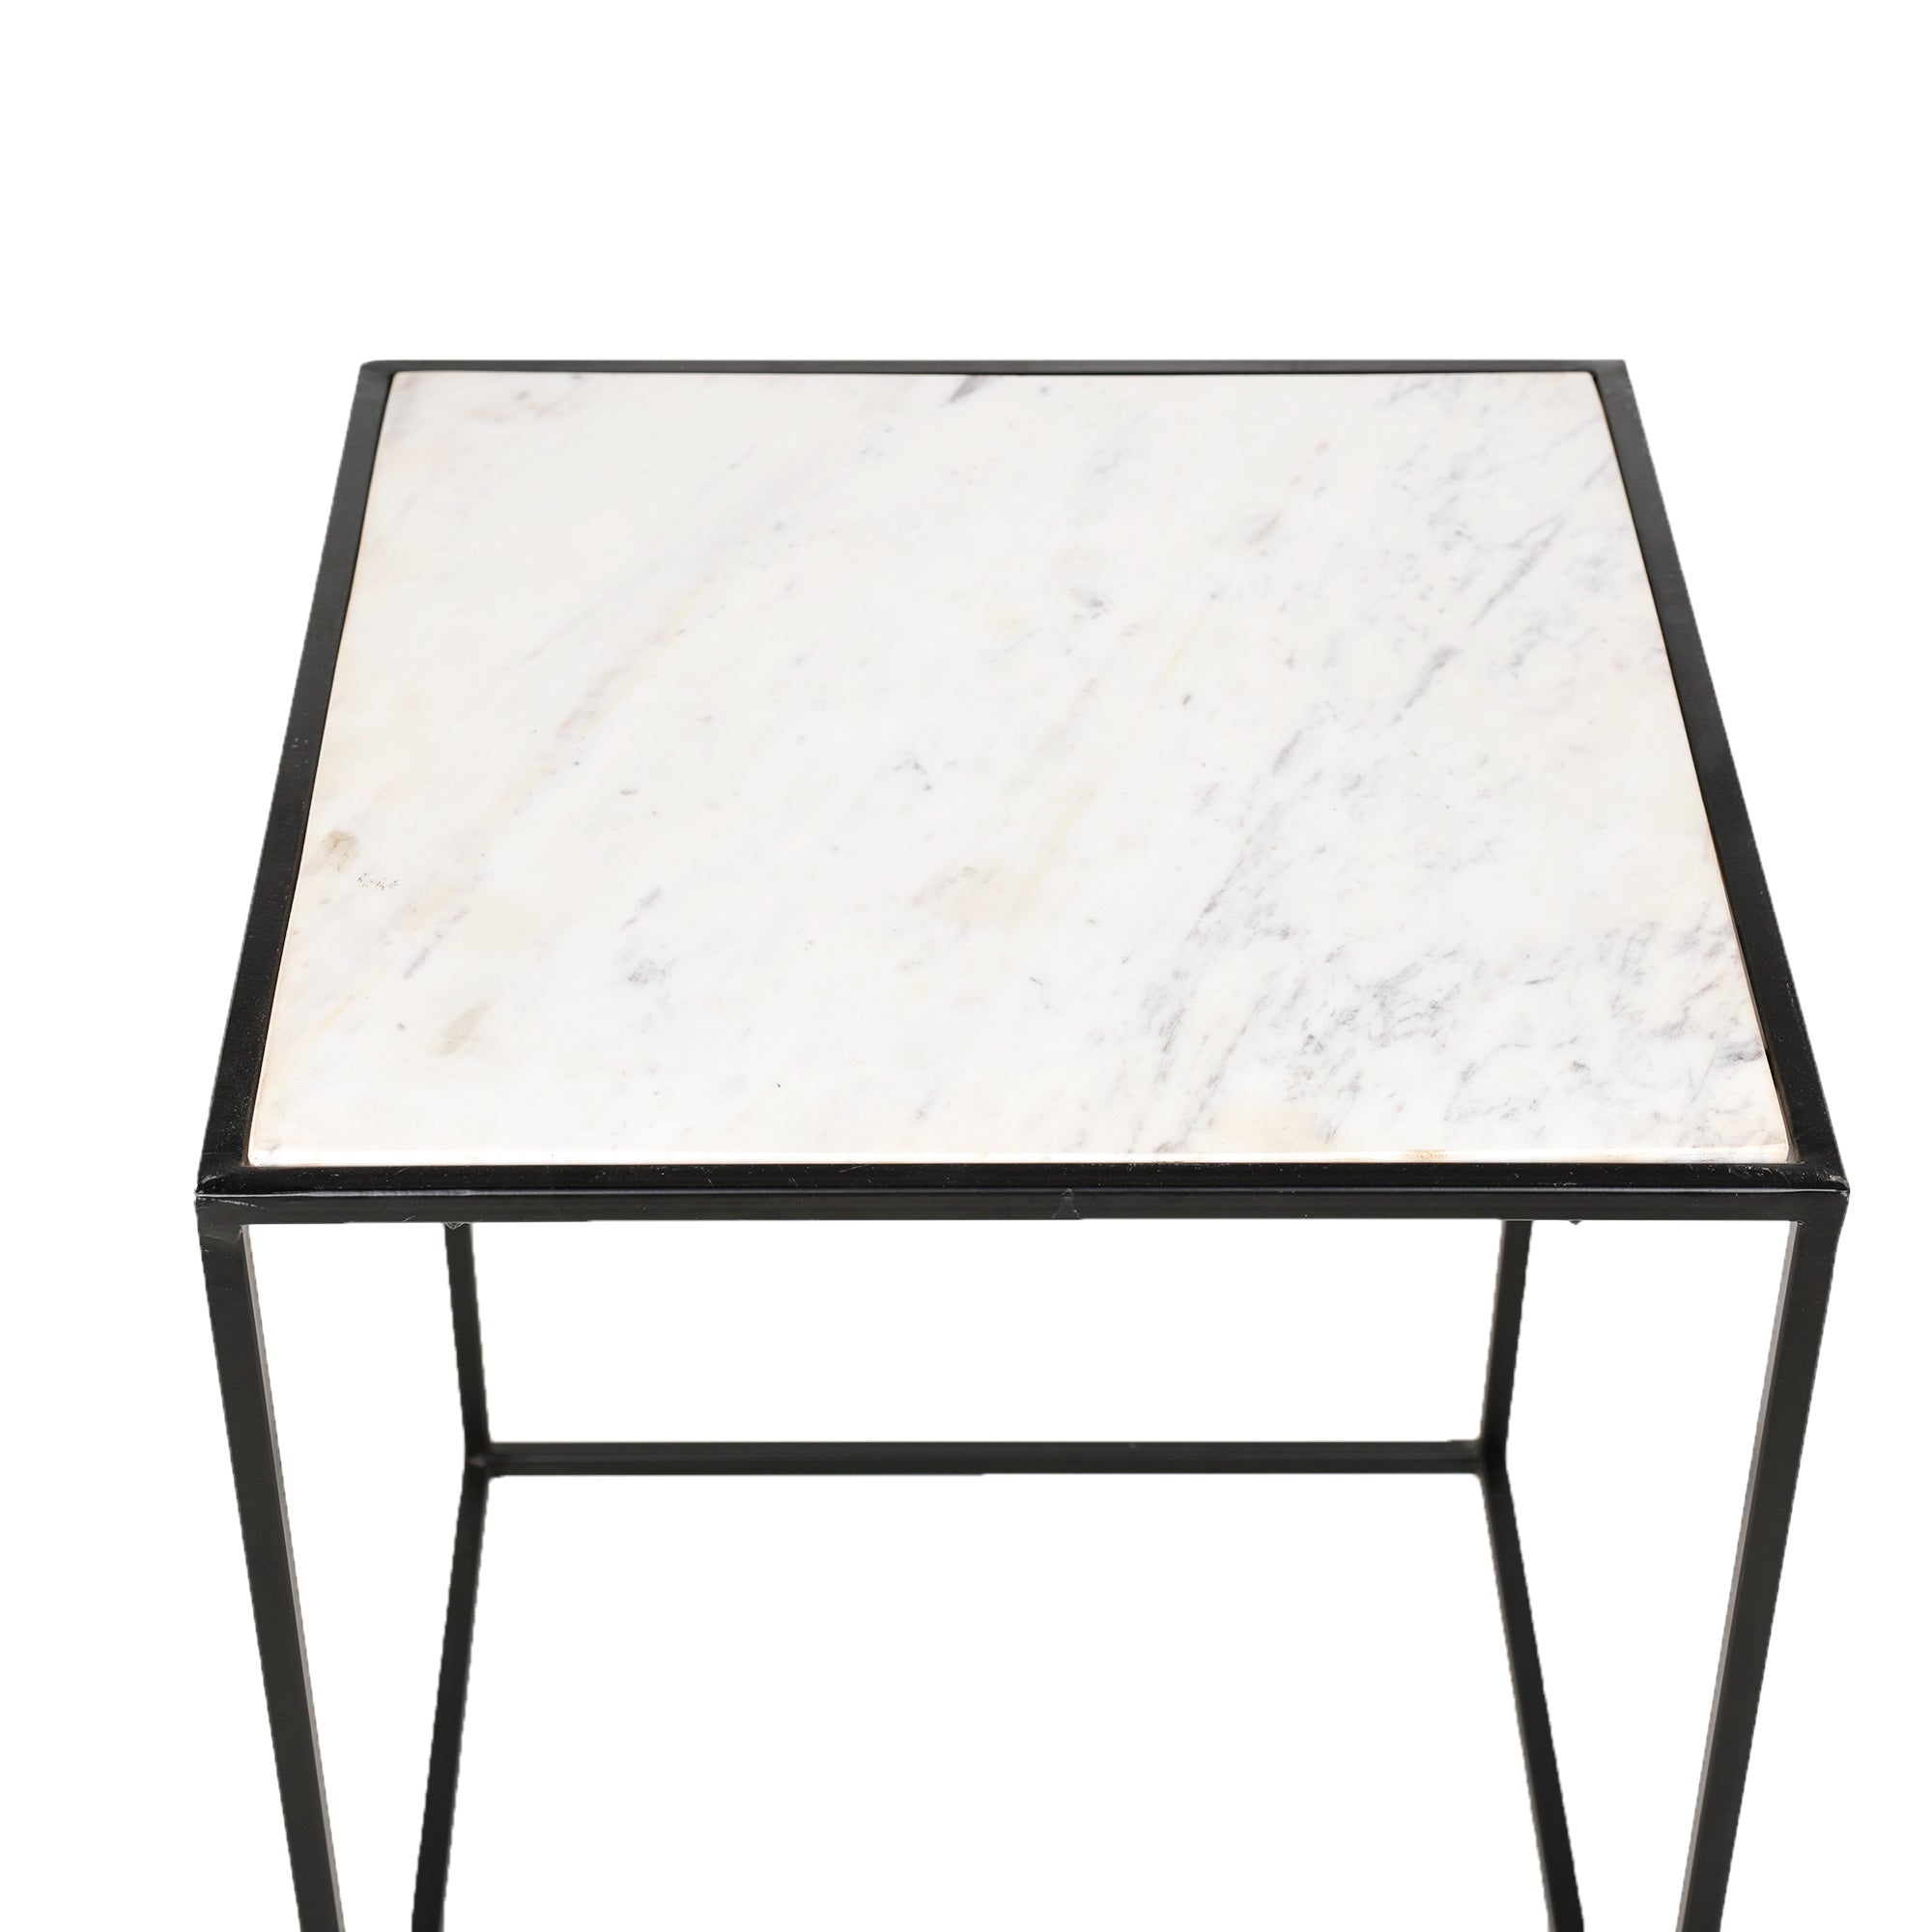 Square White Marble Top With Black Stand - 18x22 inches